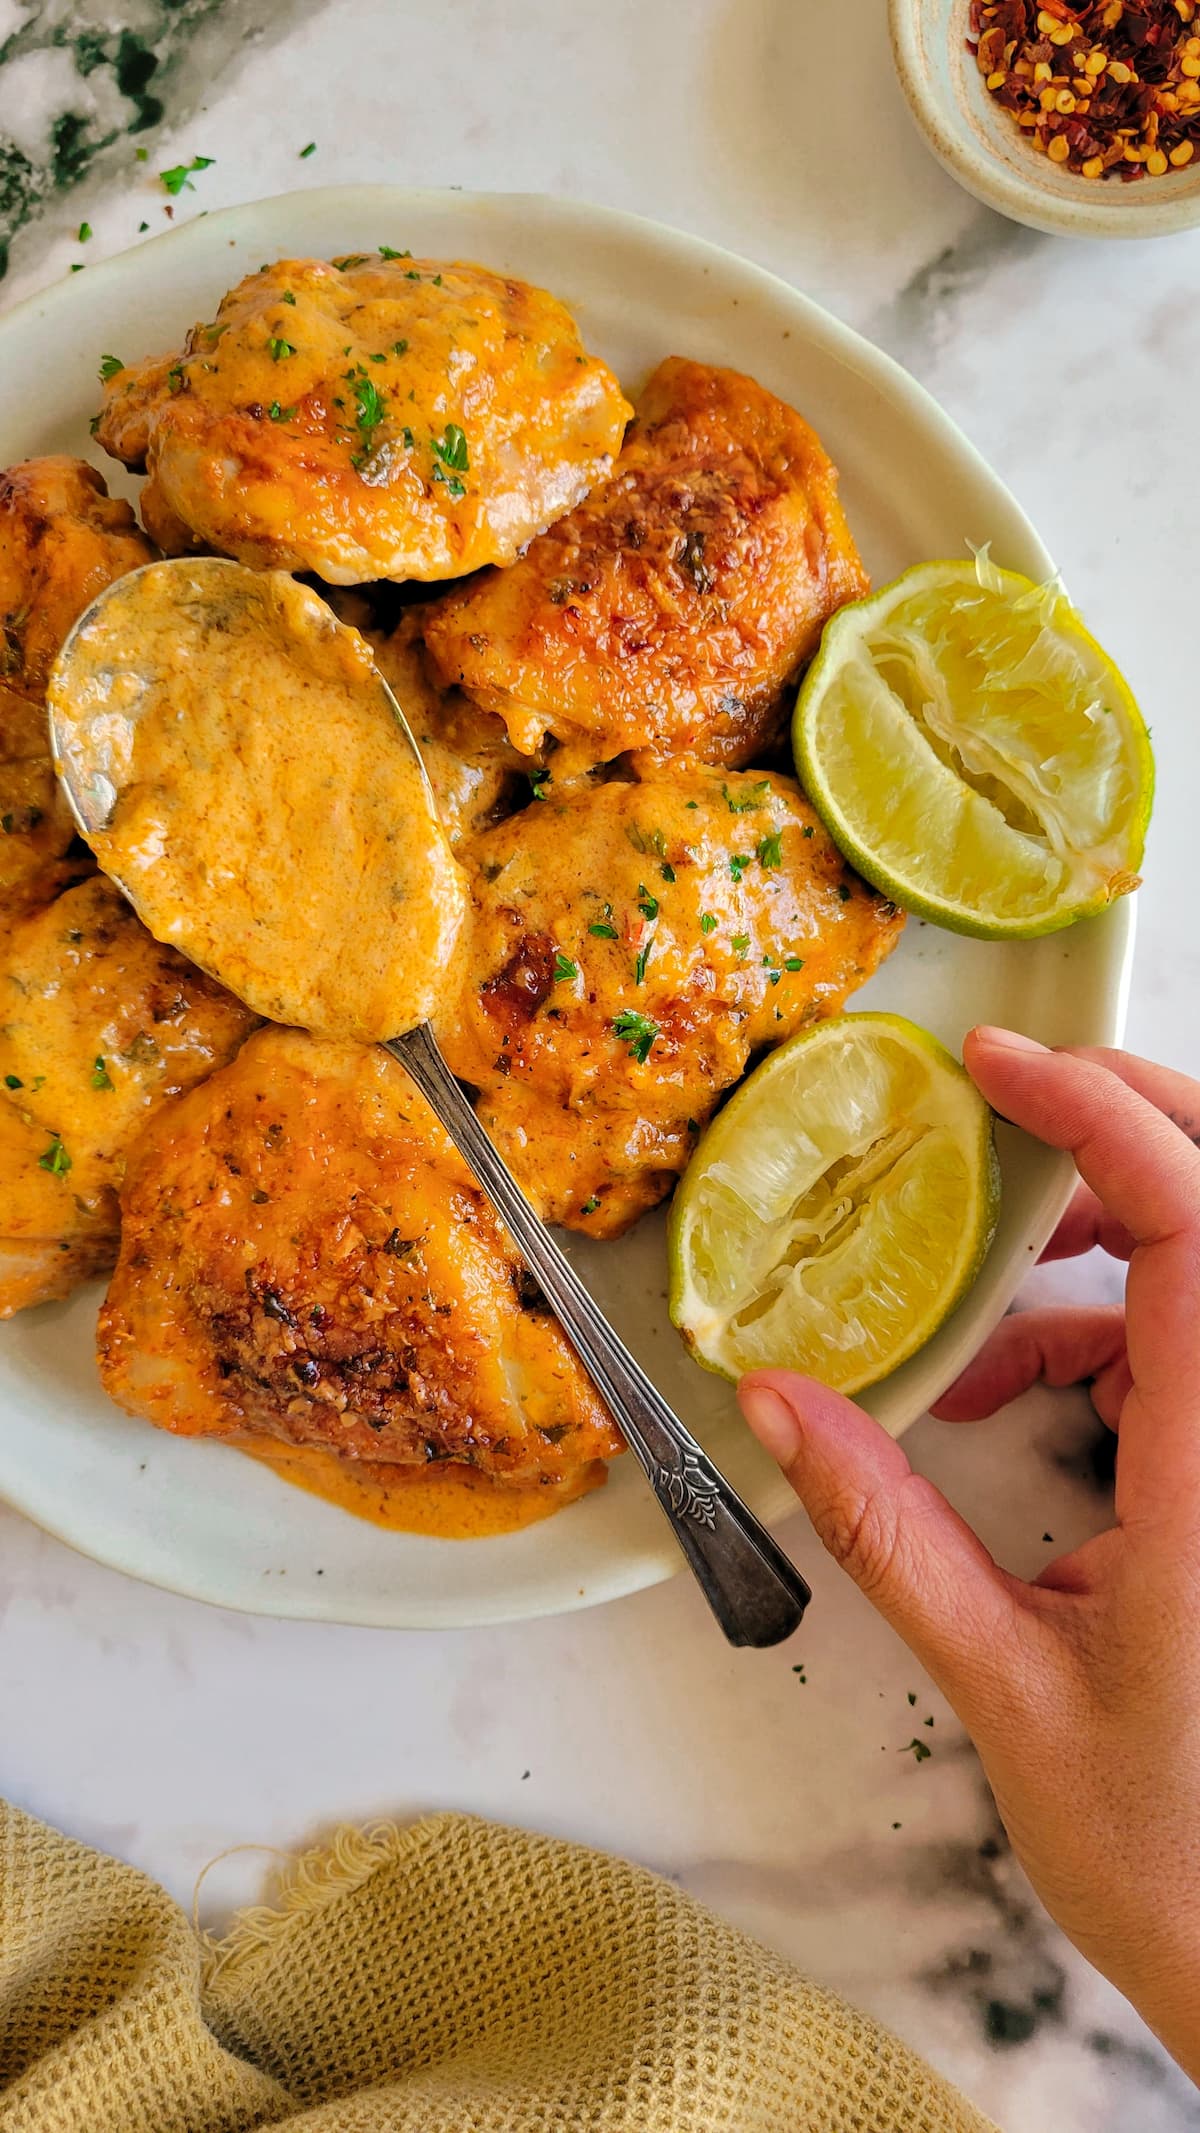 chicken thighs in orange sauce on a plate with a spoon and two limes, hand grabbing a lime